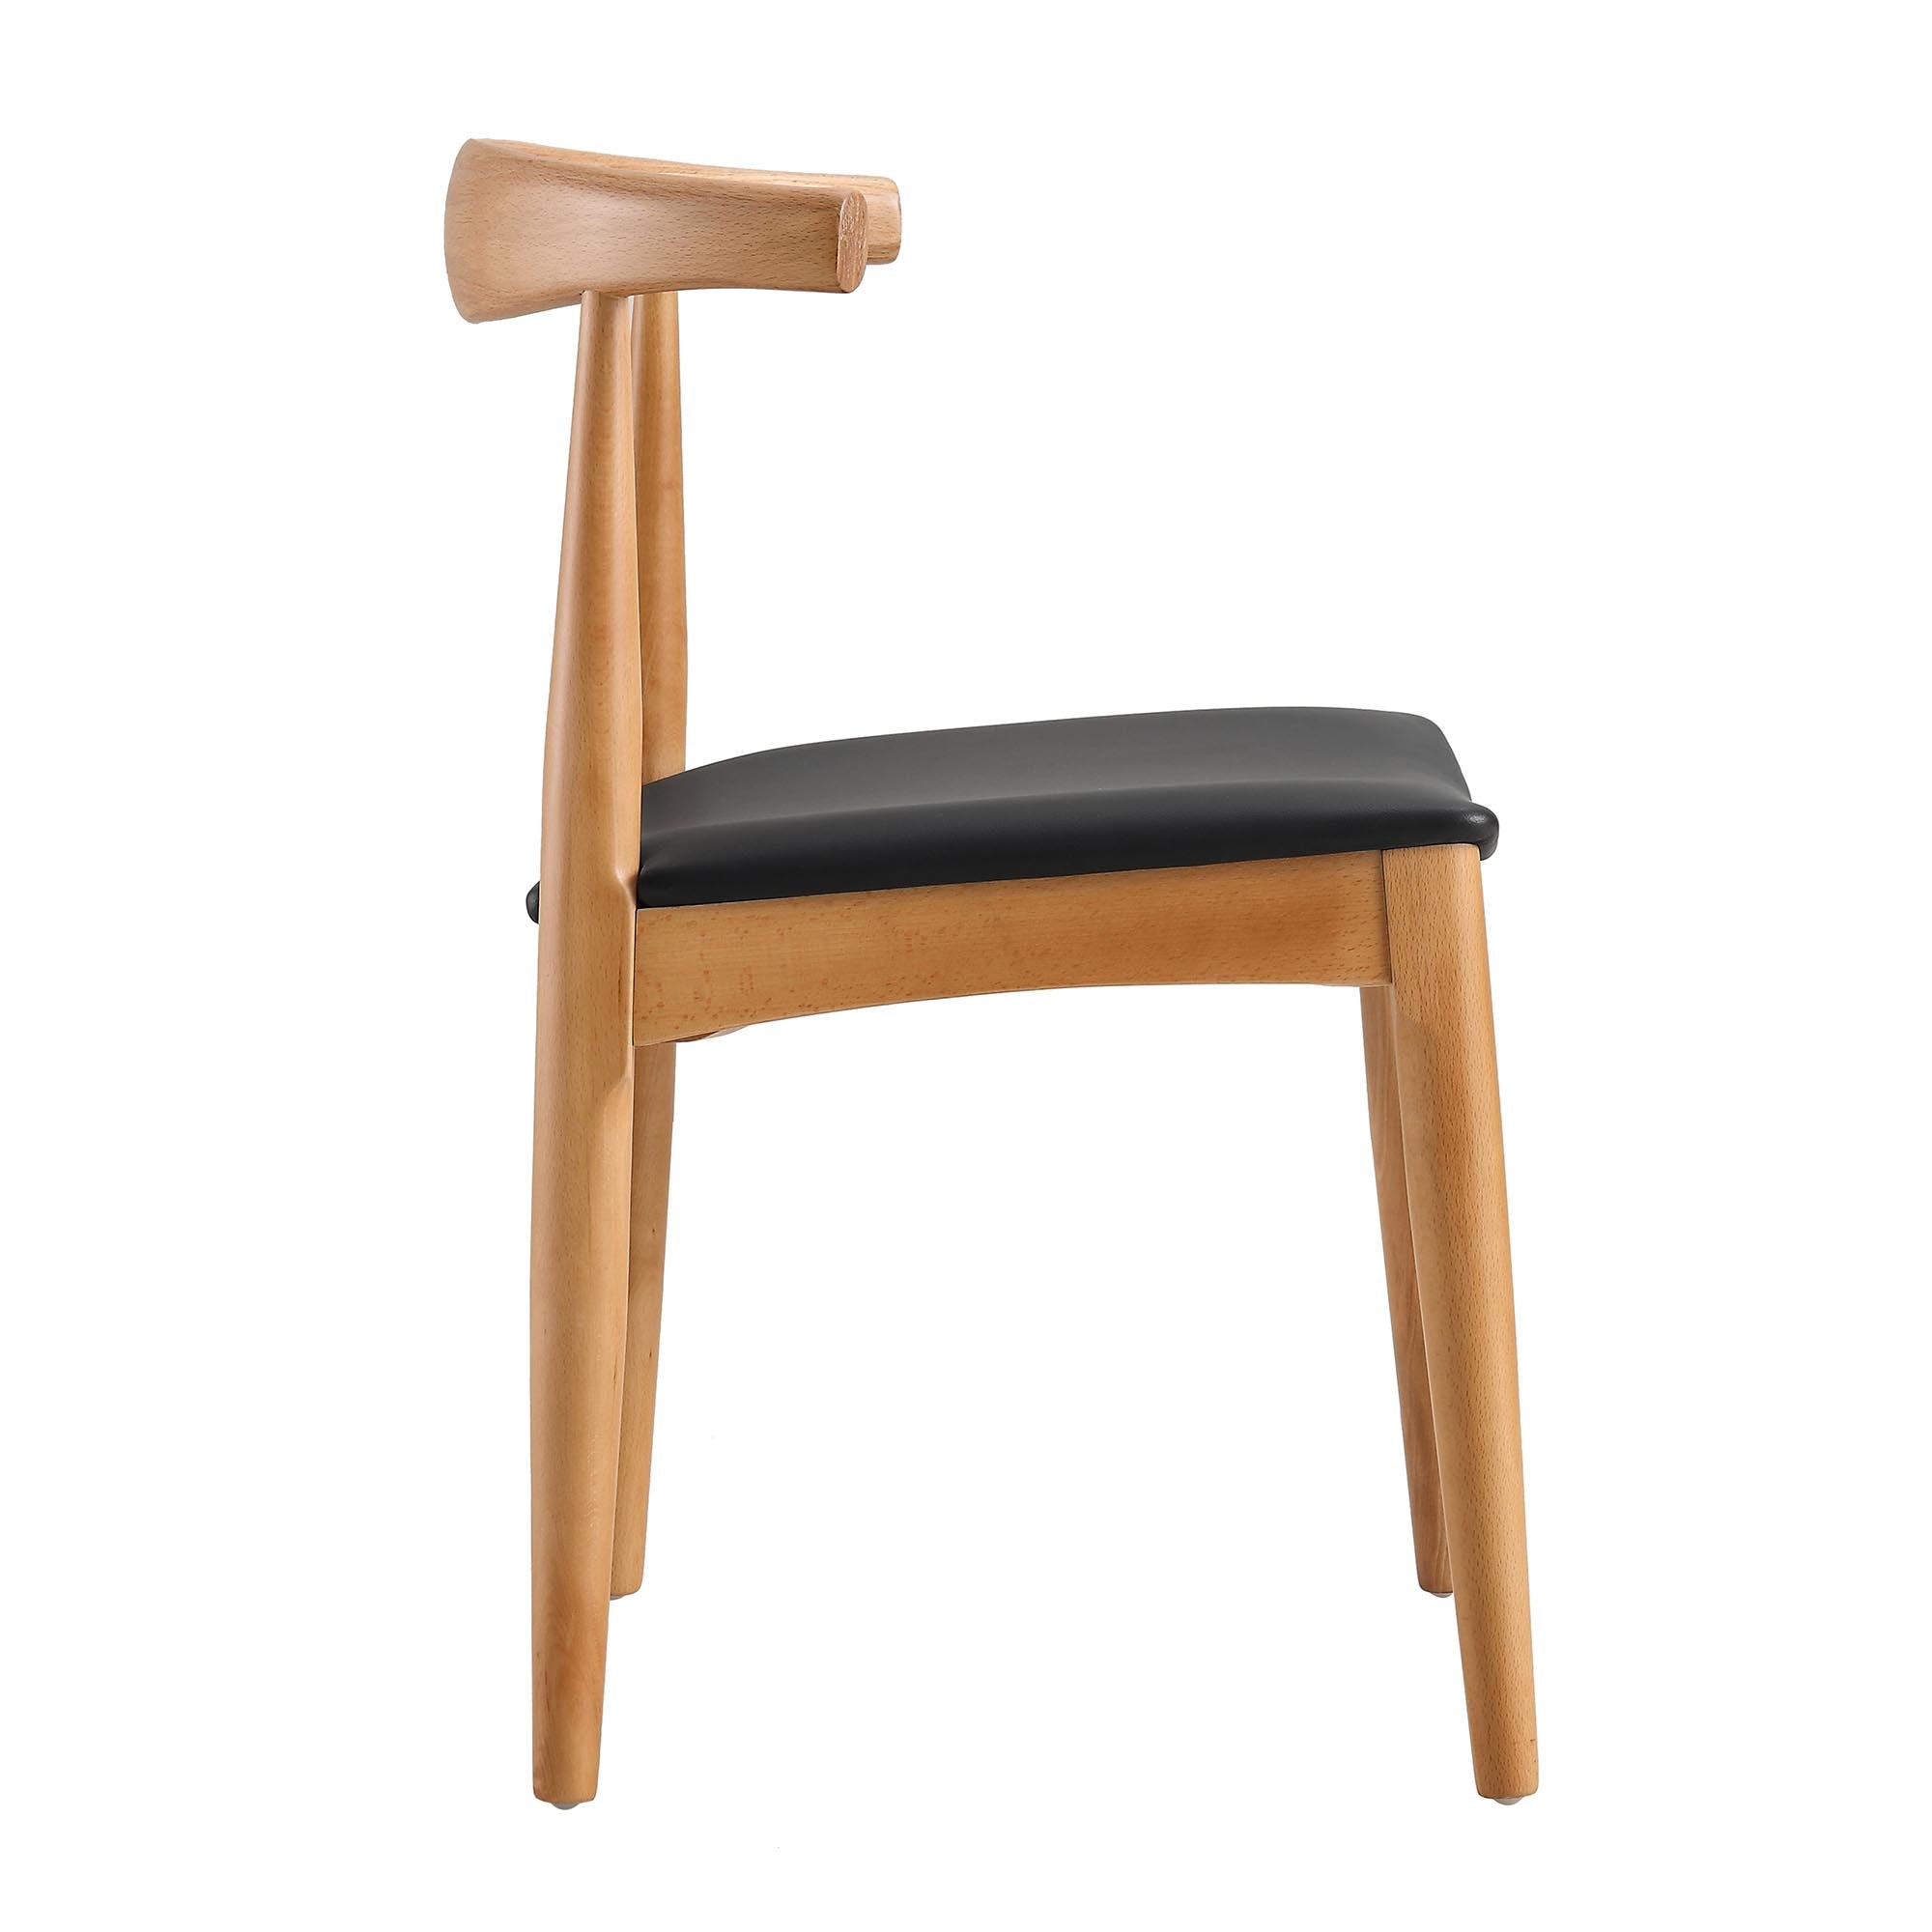 Arley Set of 2 Beech Wood Dining Chairs, Natural and Black